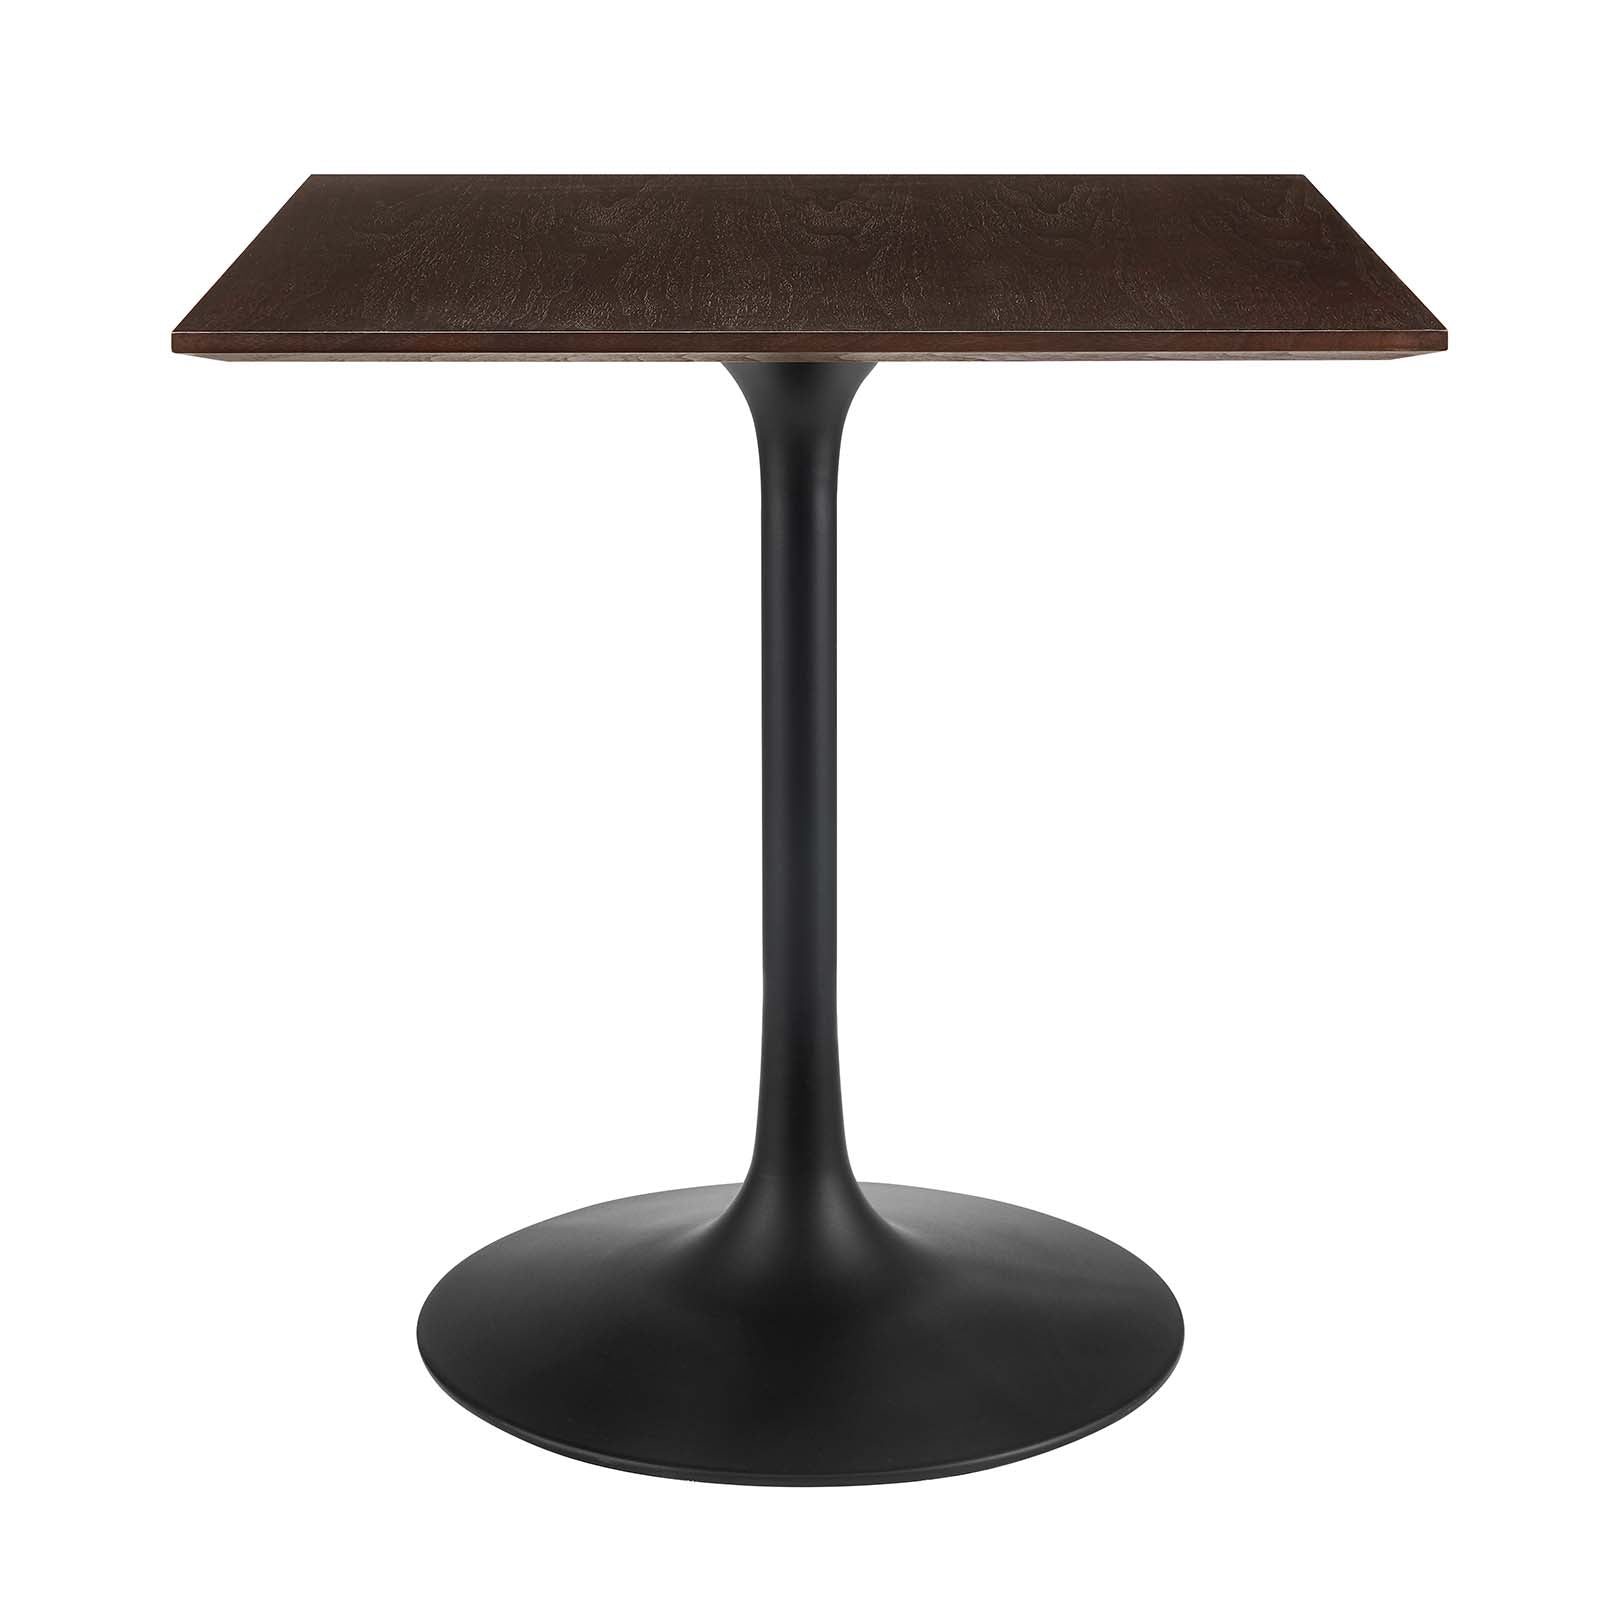 Lippa 28" Wood Square Dining Table - East Shore Modern Home Furnishings